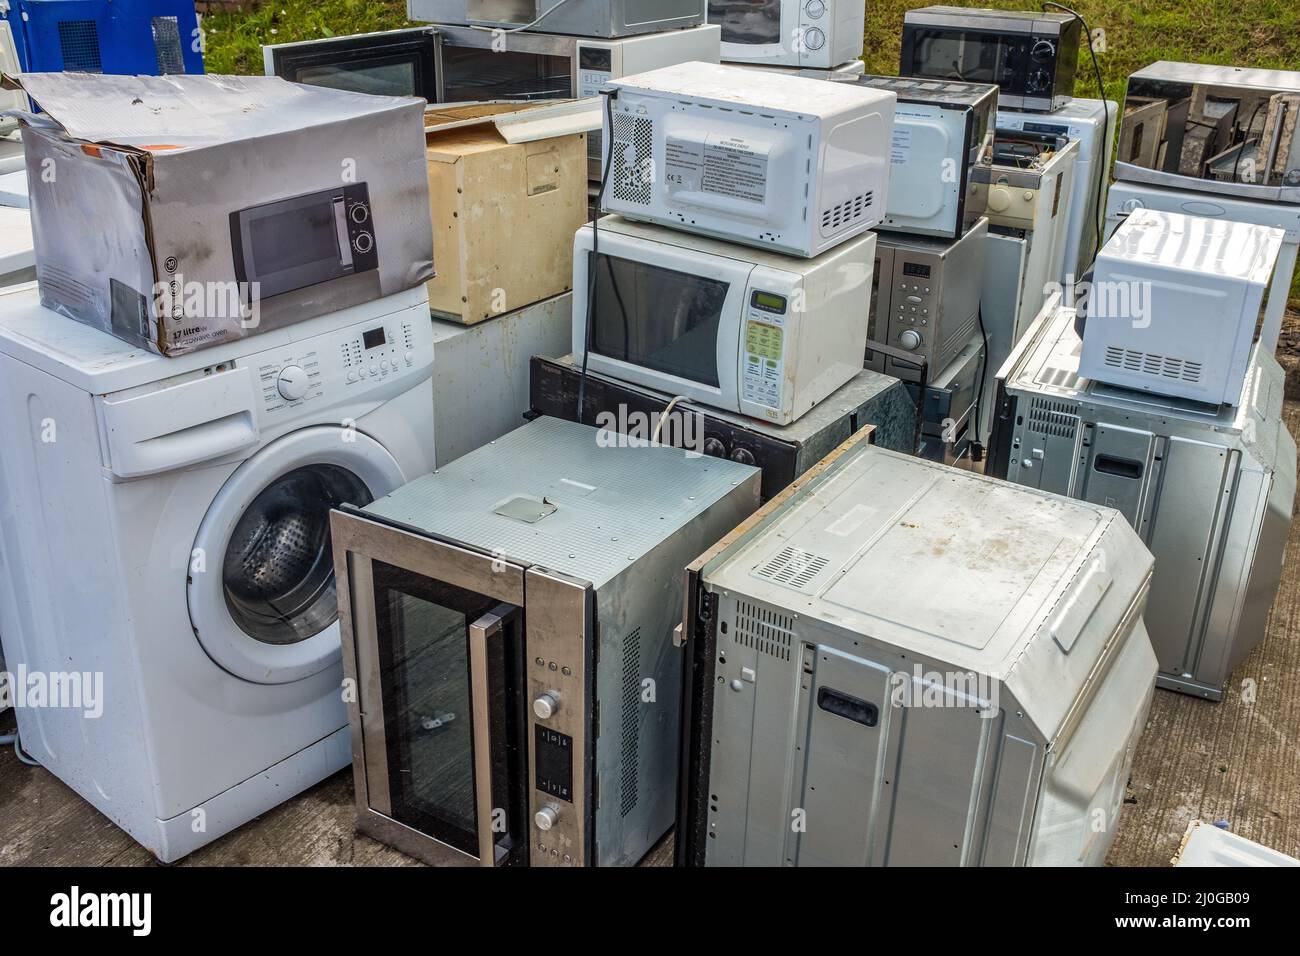 Domestic Appliances At A Recycling Centre Stock Photo